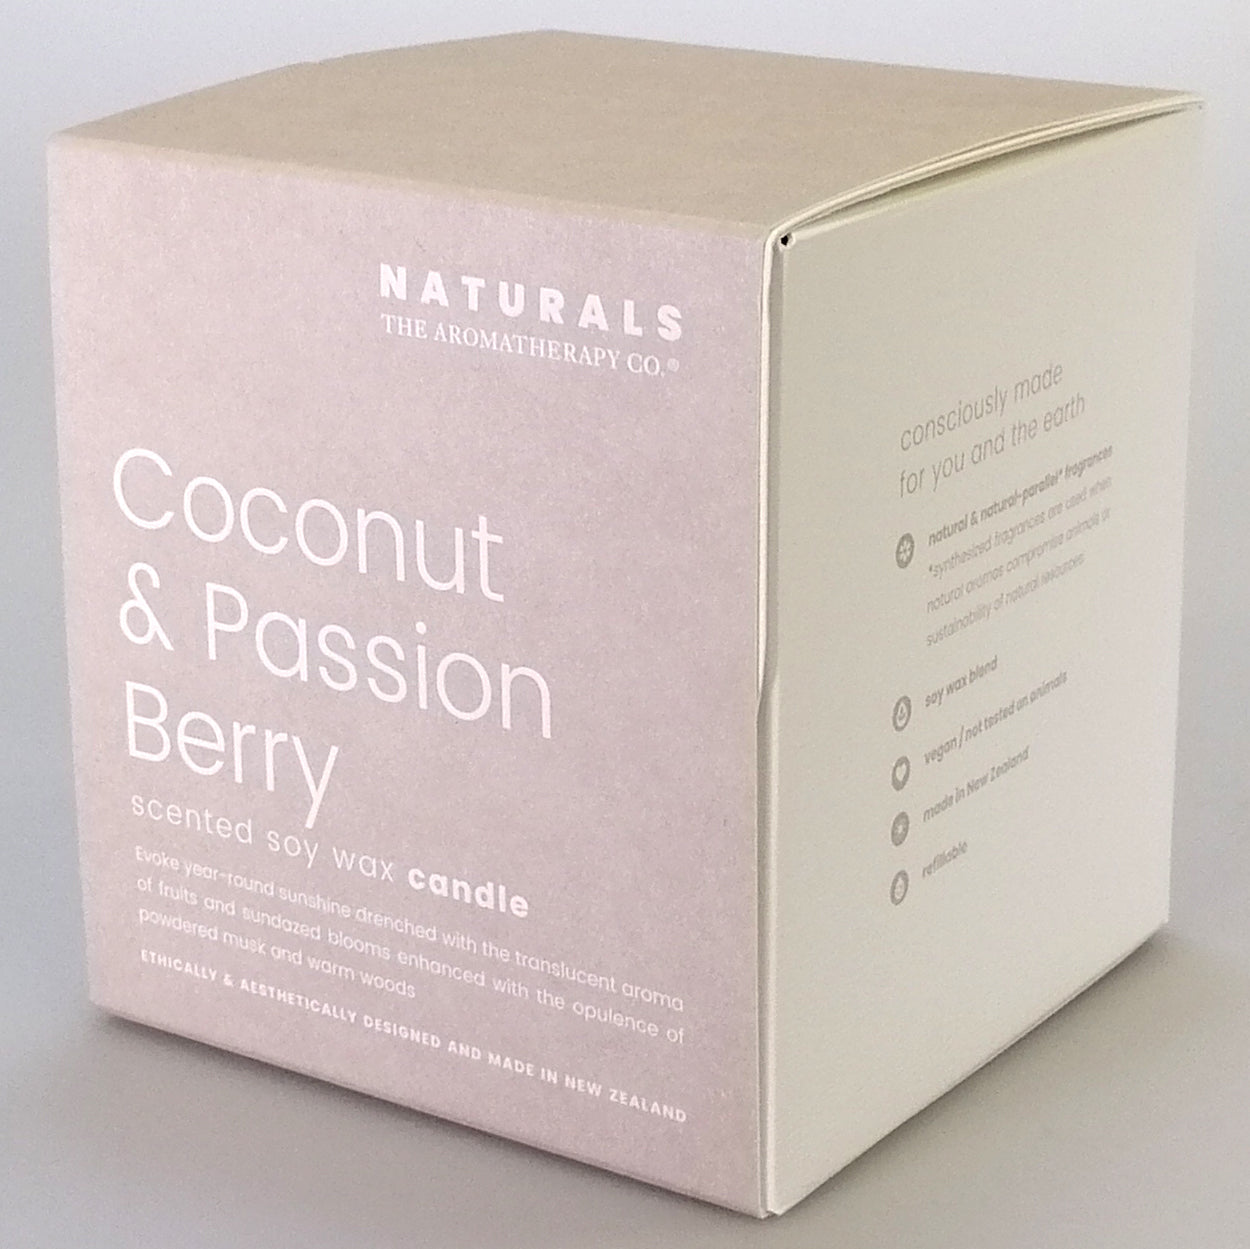 The Aromatherapy Co. Naturals - Coconut & Passion Berry Soy Wax Candle